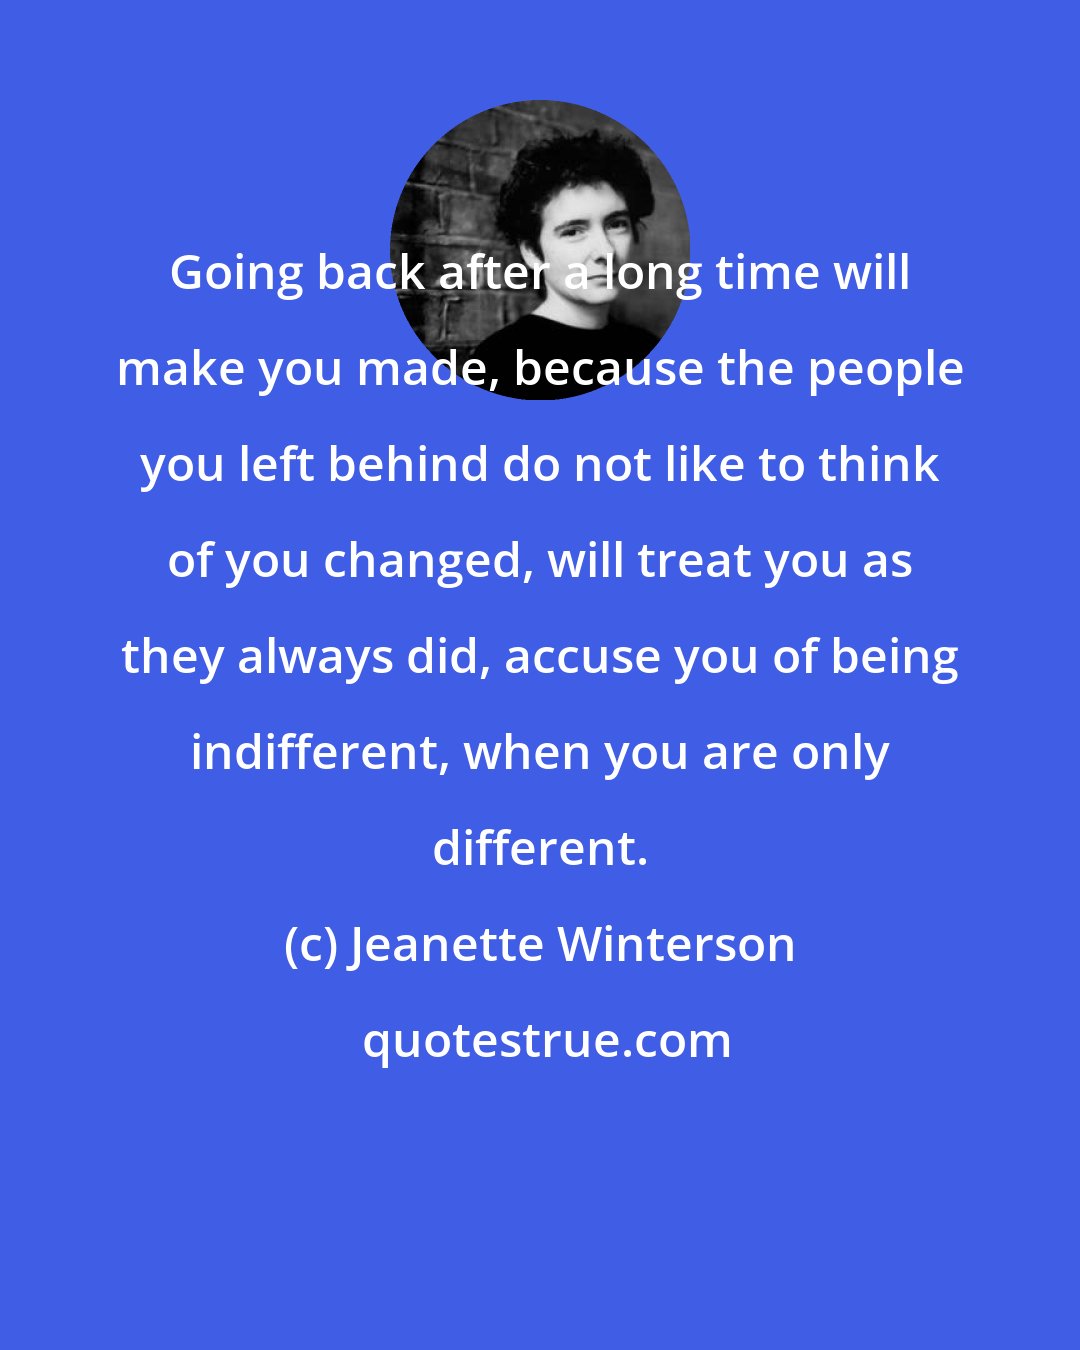 Jeanette Winterson: Going back after a long time will make you made, because the people you left behind do not like to think of you changed, will treat you as they always did, accuse you of being indifferent, when you are only different.